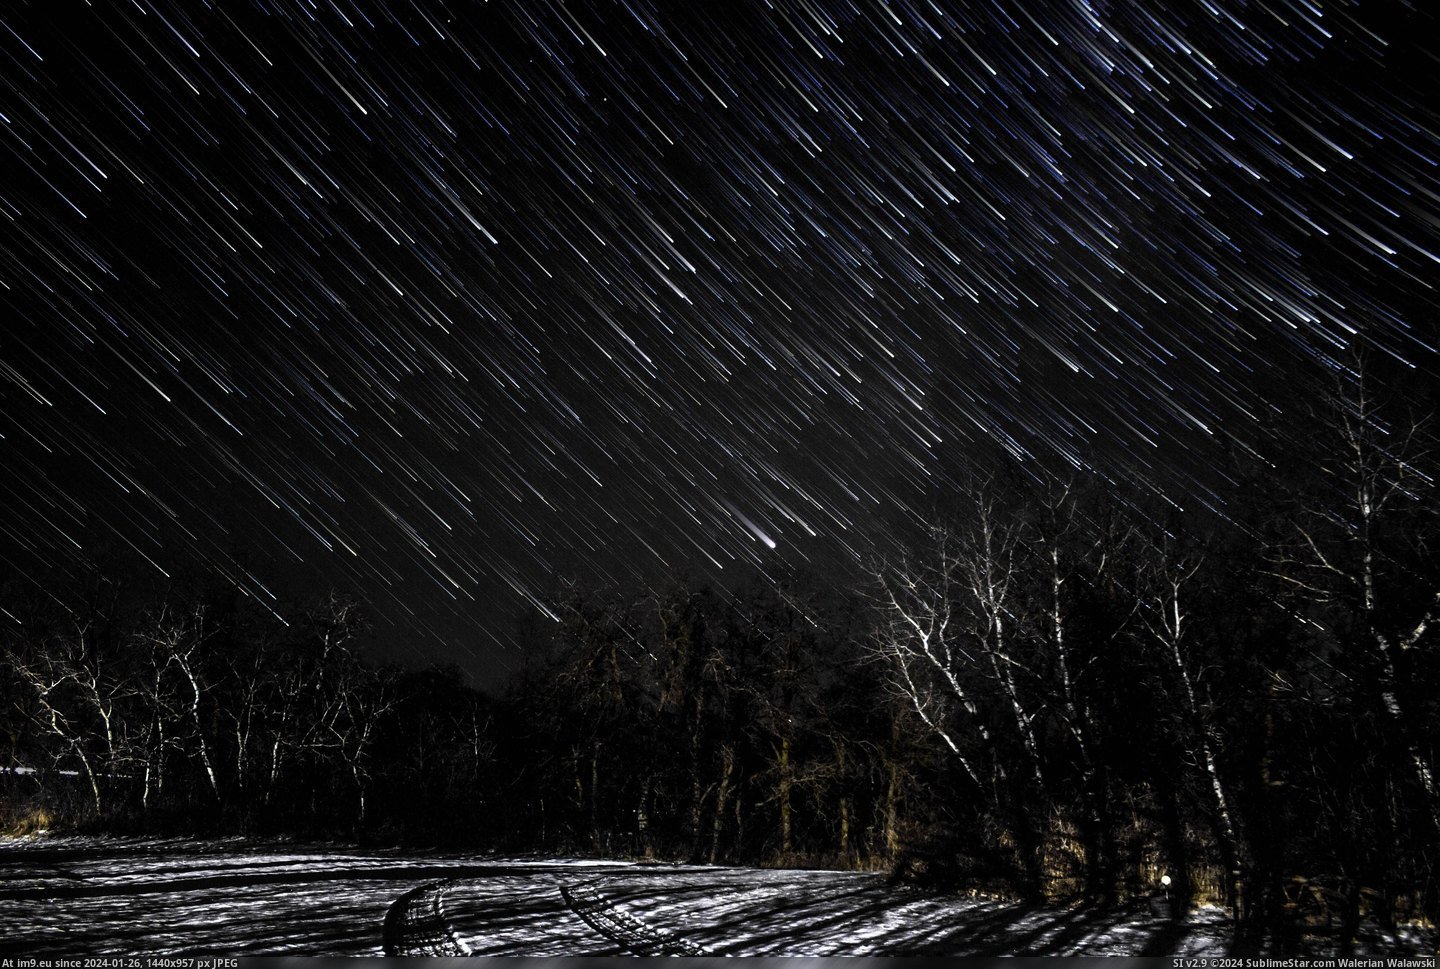 #Star #Canada #Showers #Manitoba #5184x3456 #Snowy [Earthporn] Snowy Star Showers in Manitoba Canada [5184x3456] Pic. (Изображение из альбом My r/EARTHPORN favs))